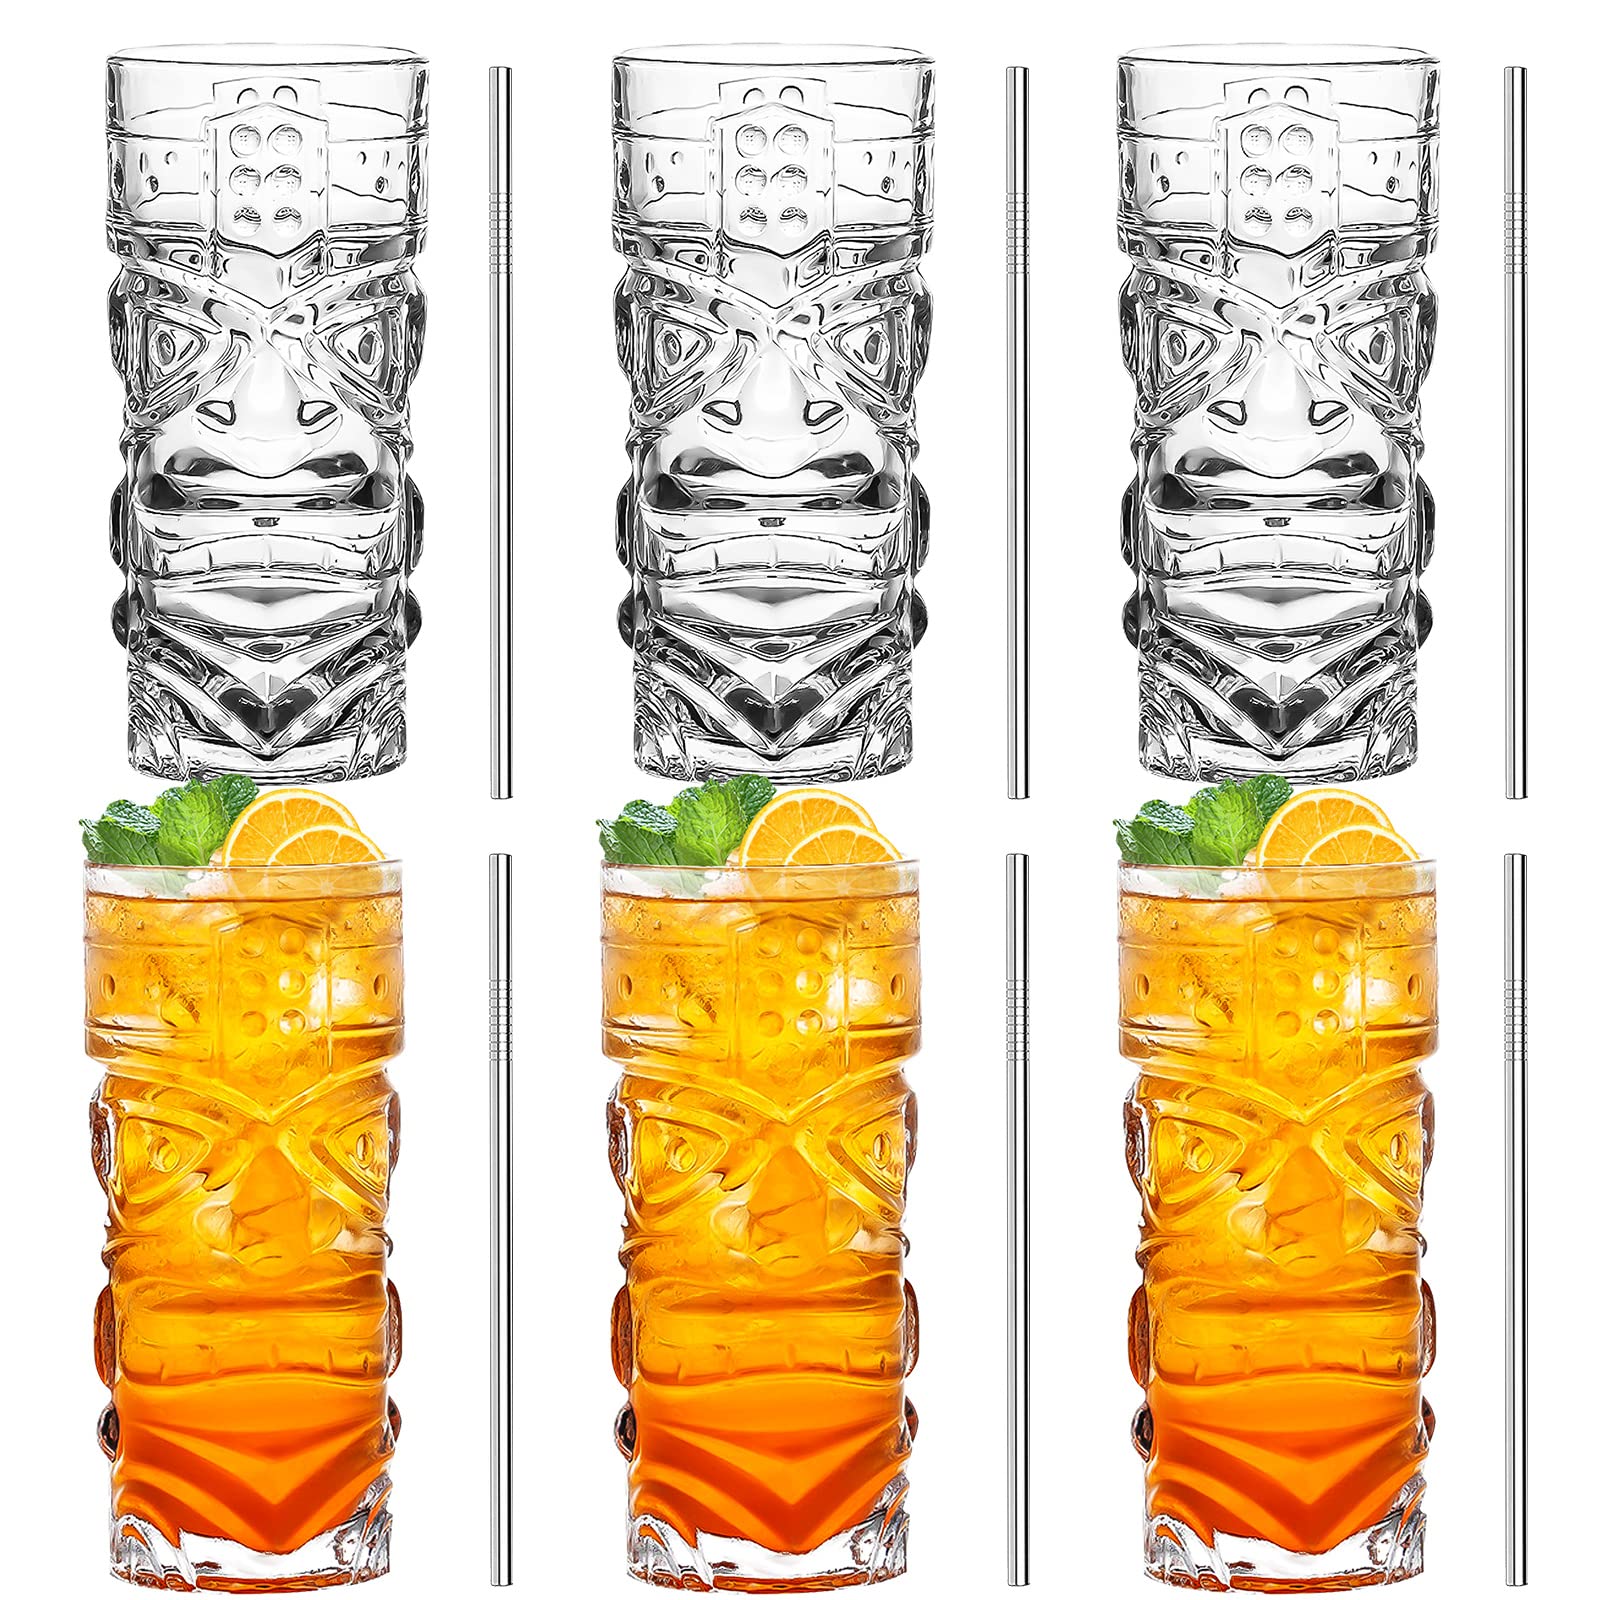 INFTYLE Clear Tiki Glasses Set of 6-14 oz Modern Bar Tiki Cocktail Glasses Perfect for Exotic Cocktails,Mai Tai, Hawaiian Style 